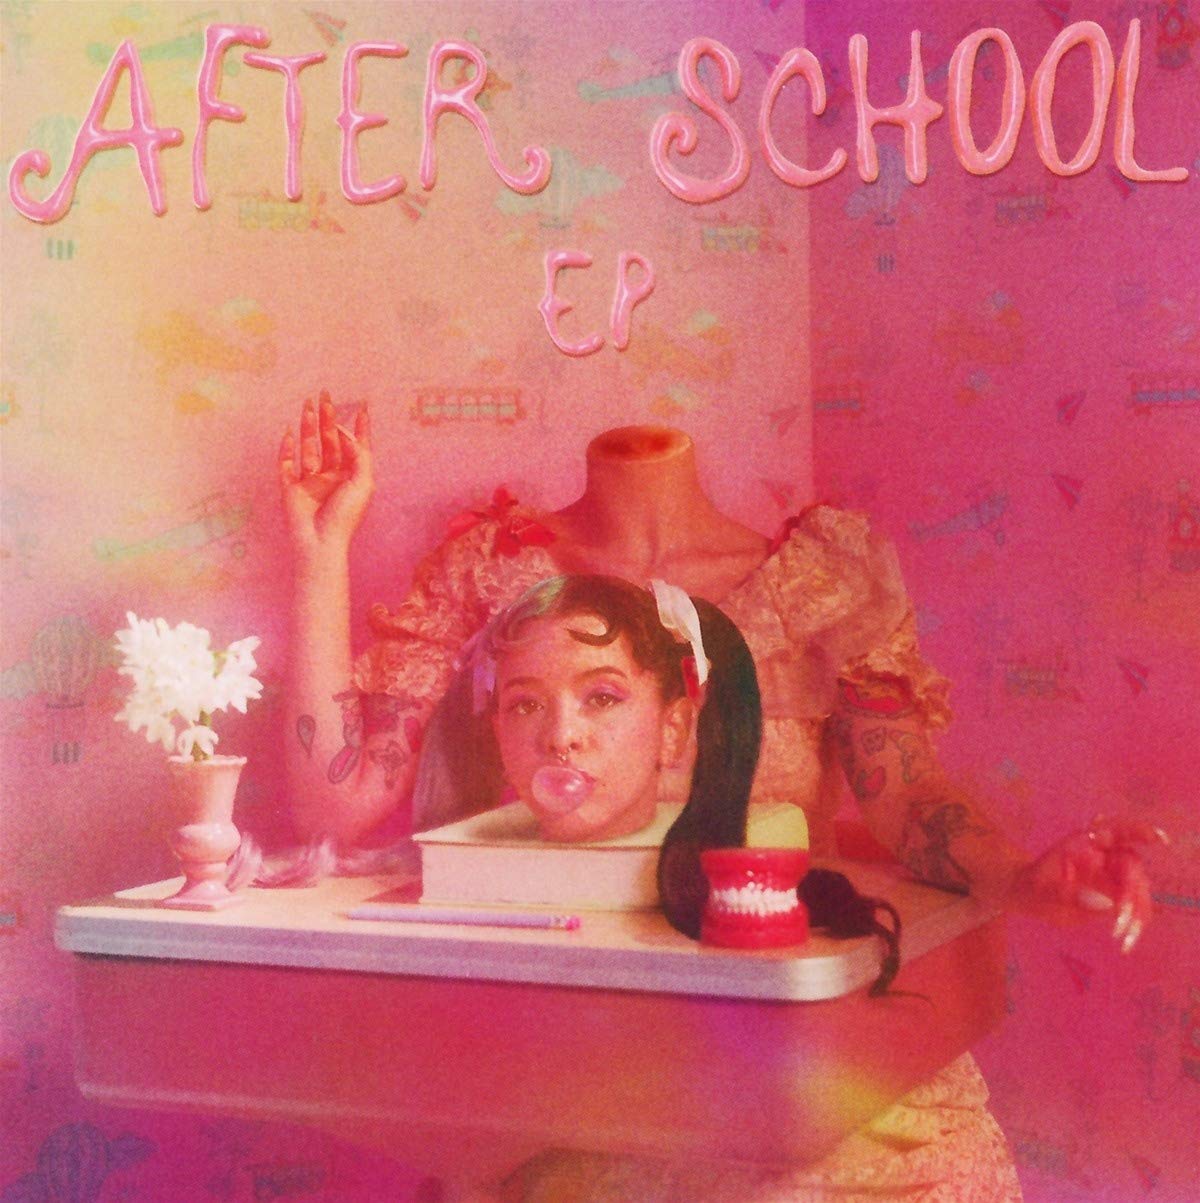 AFTER SCHOOL on MovieShack